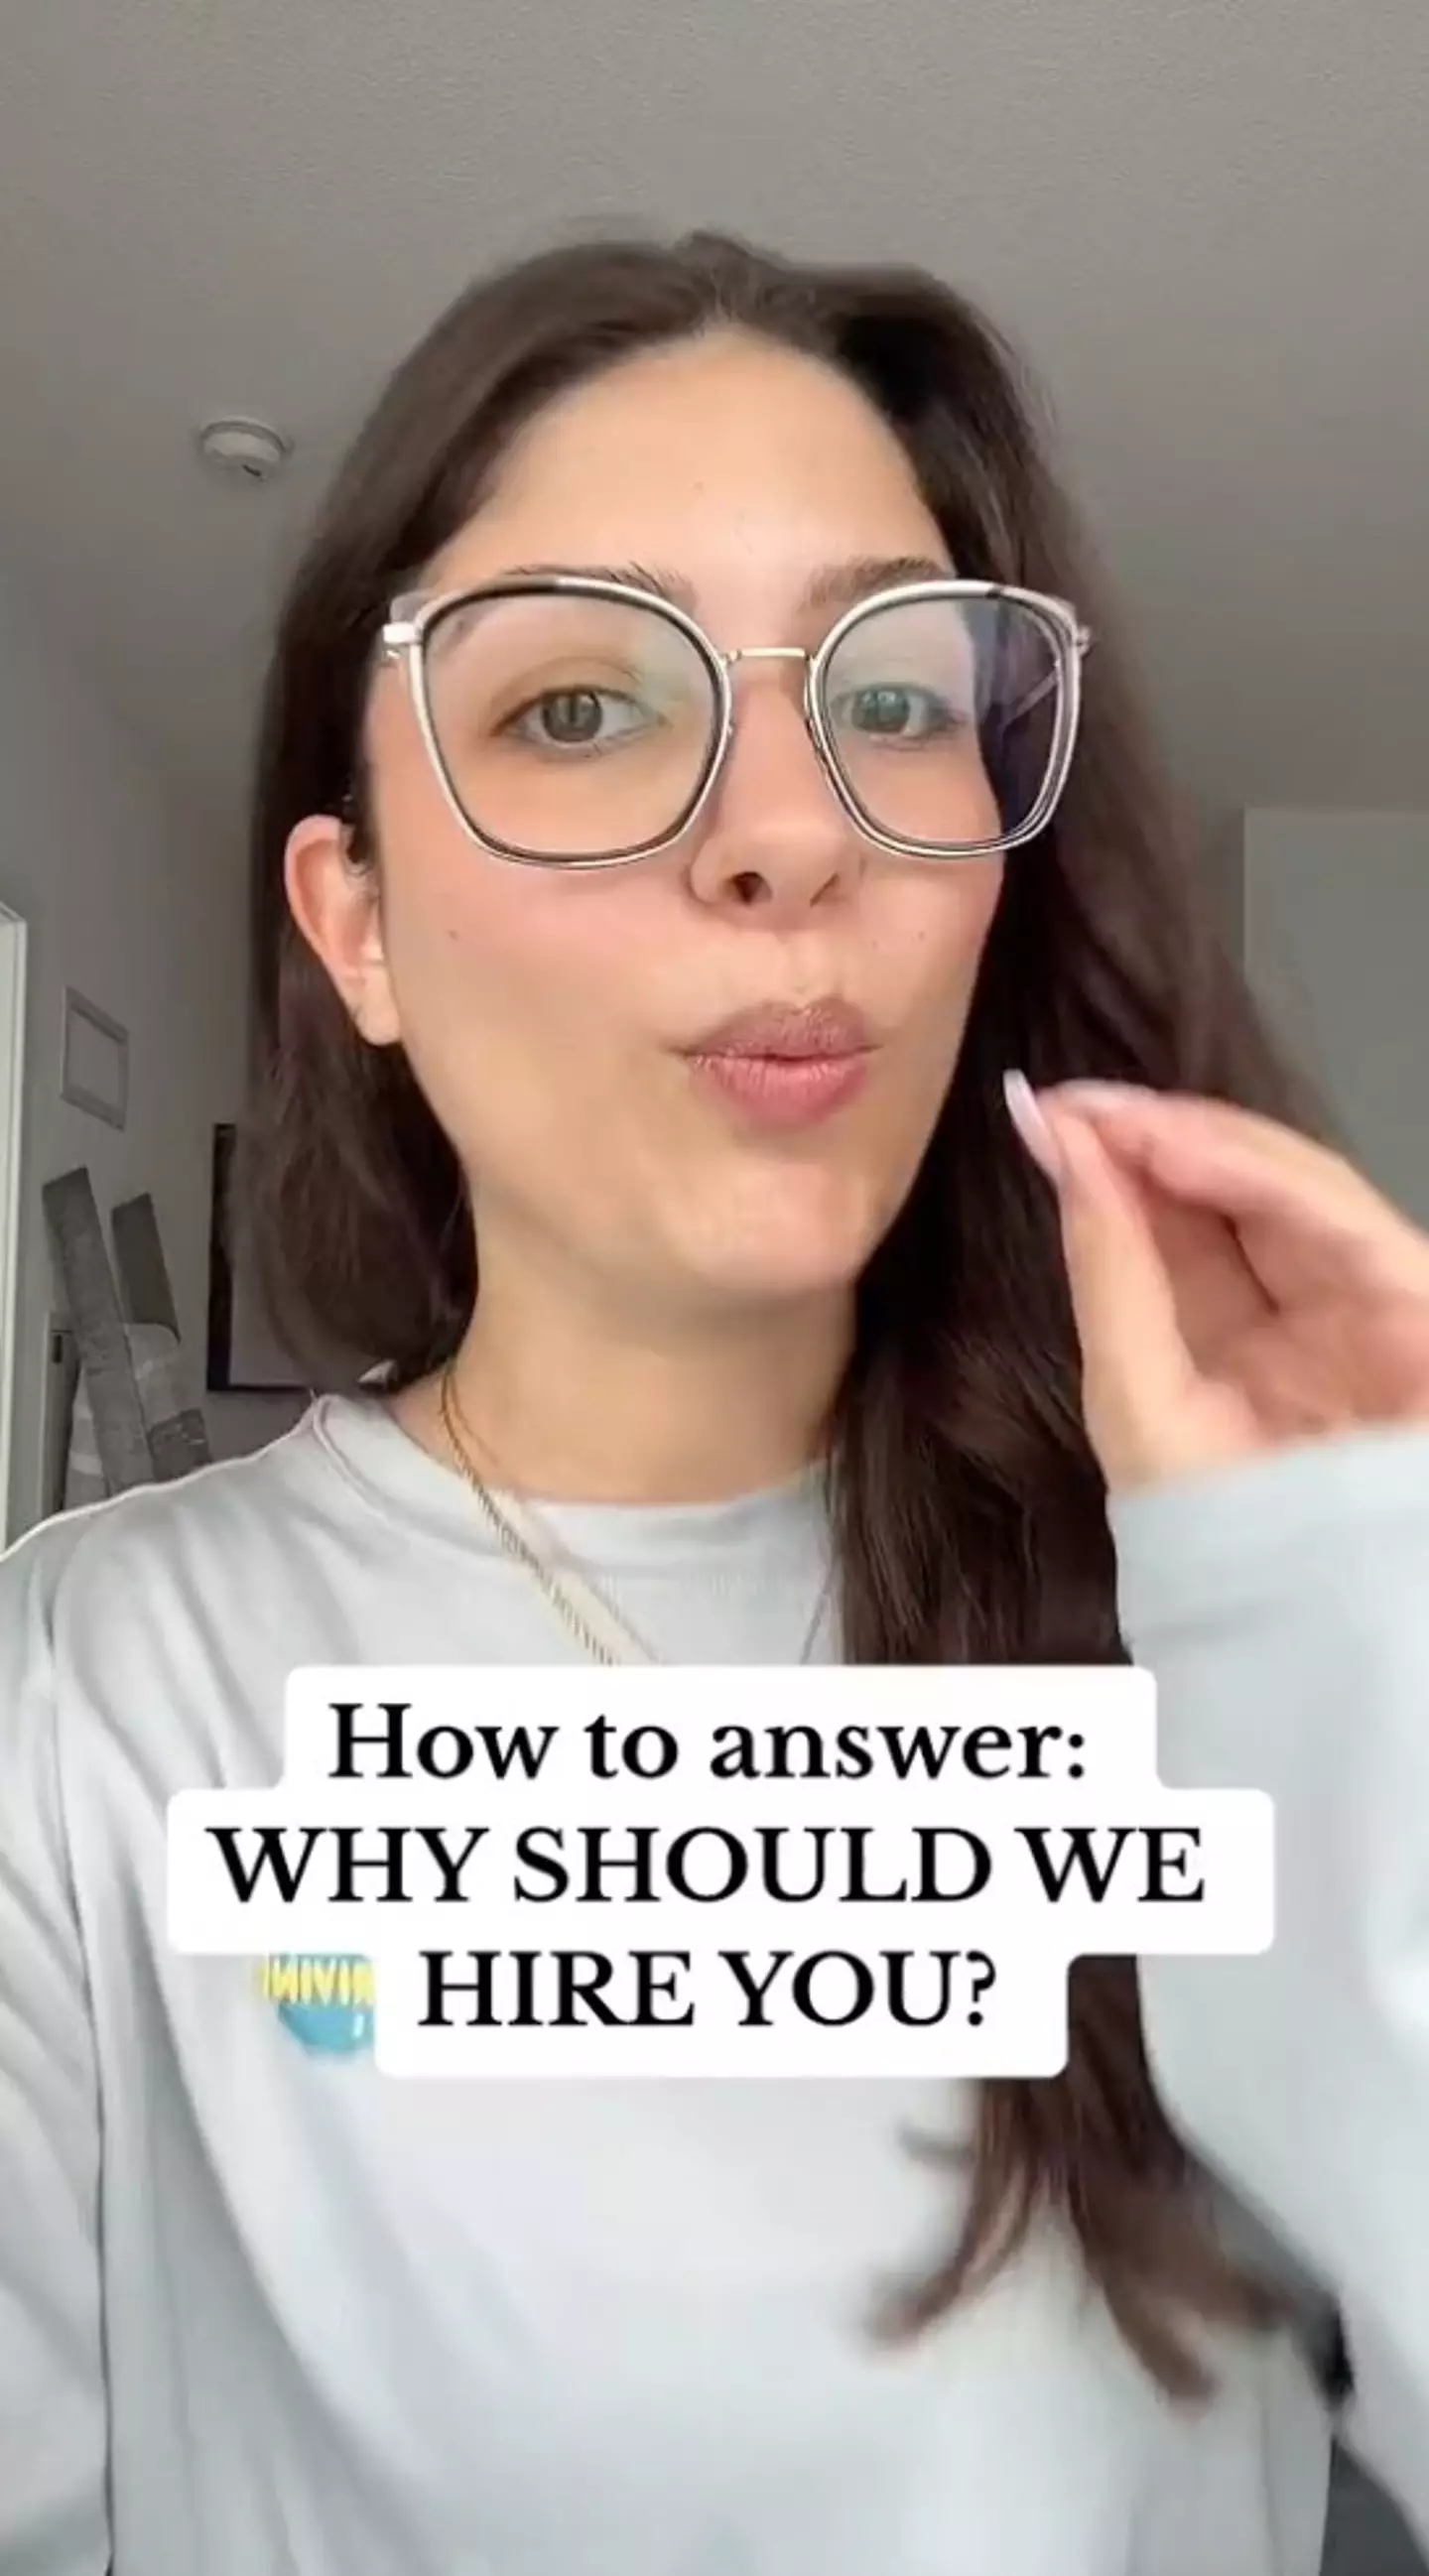 TikTok users who are looking for a job are finally finding out the answer a dreaded job interview question.